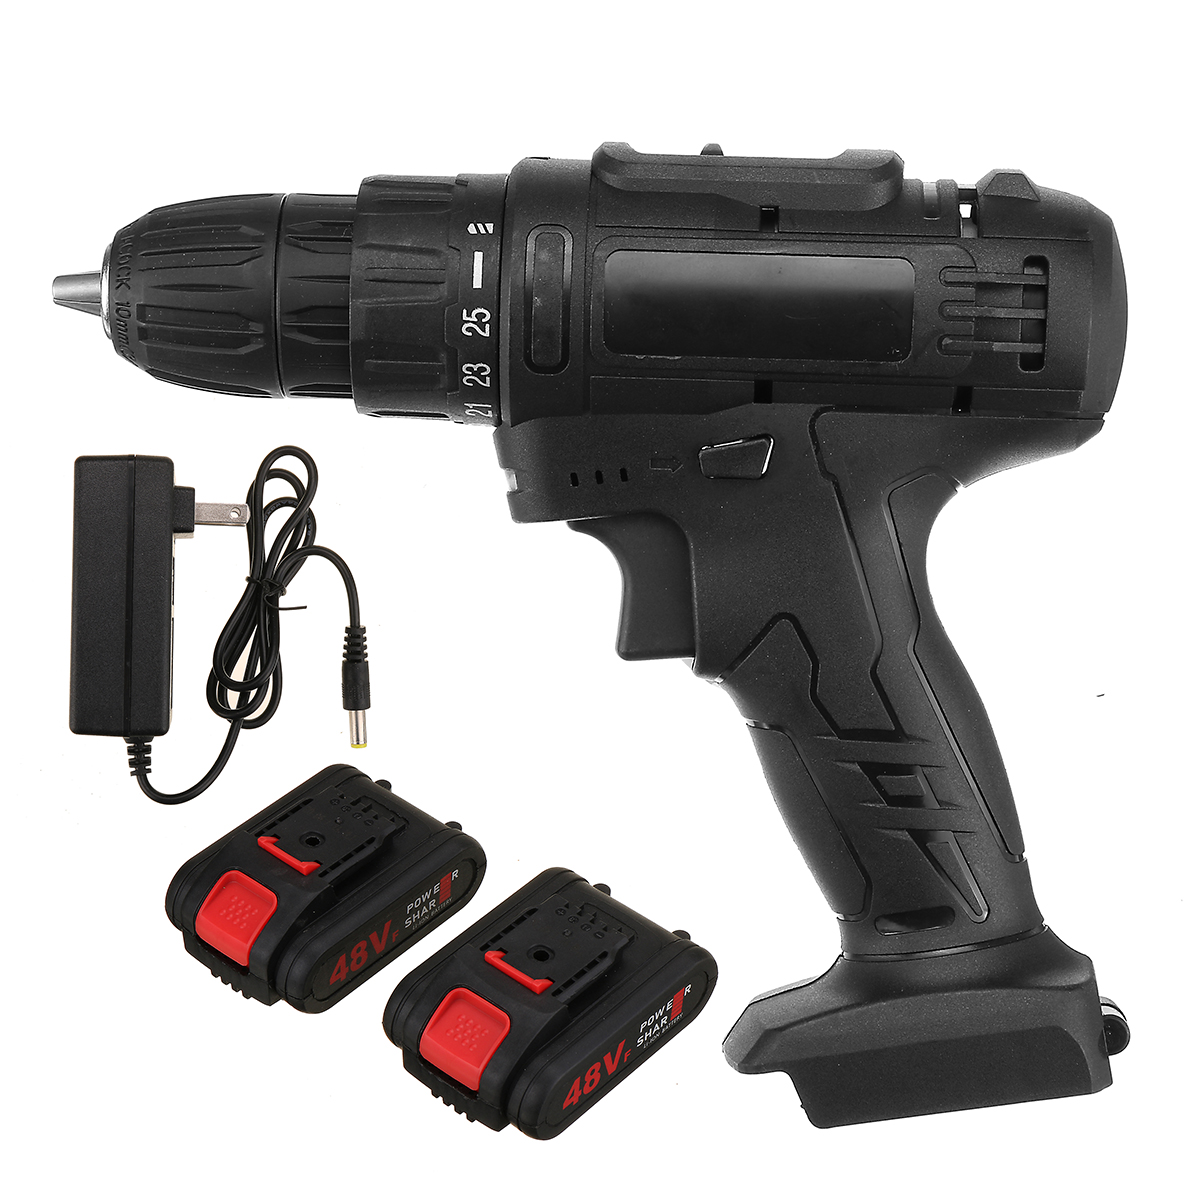 Cordless-Impact-Wrench-Drill-Socket-25-Speeds-LED-Electric-Screwdrive-w-12-Batteries-1712153-10